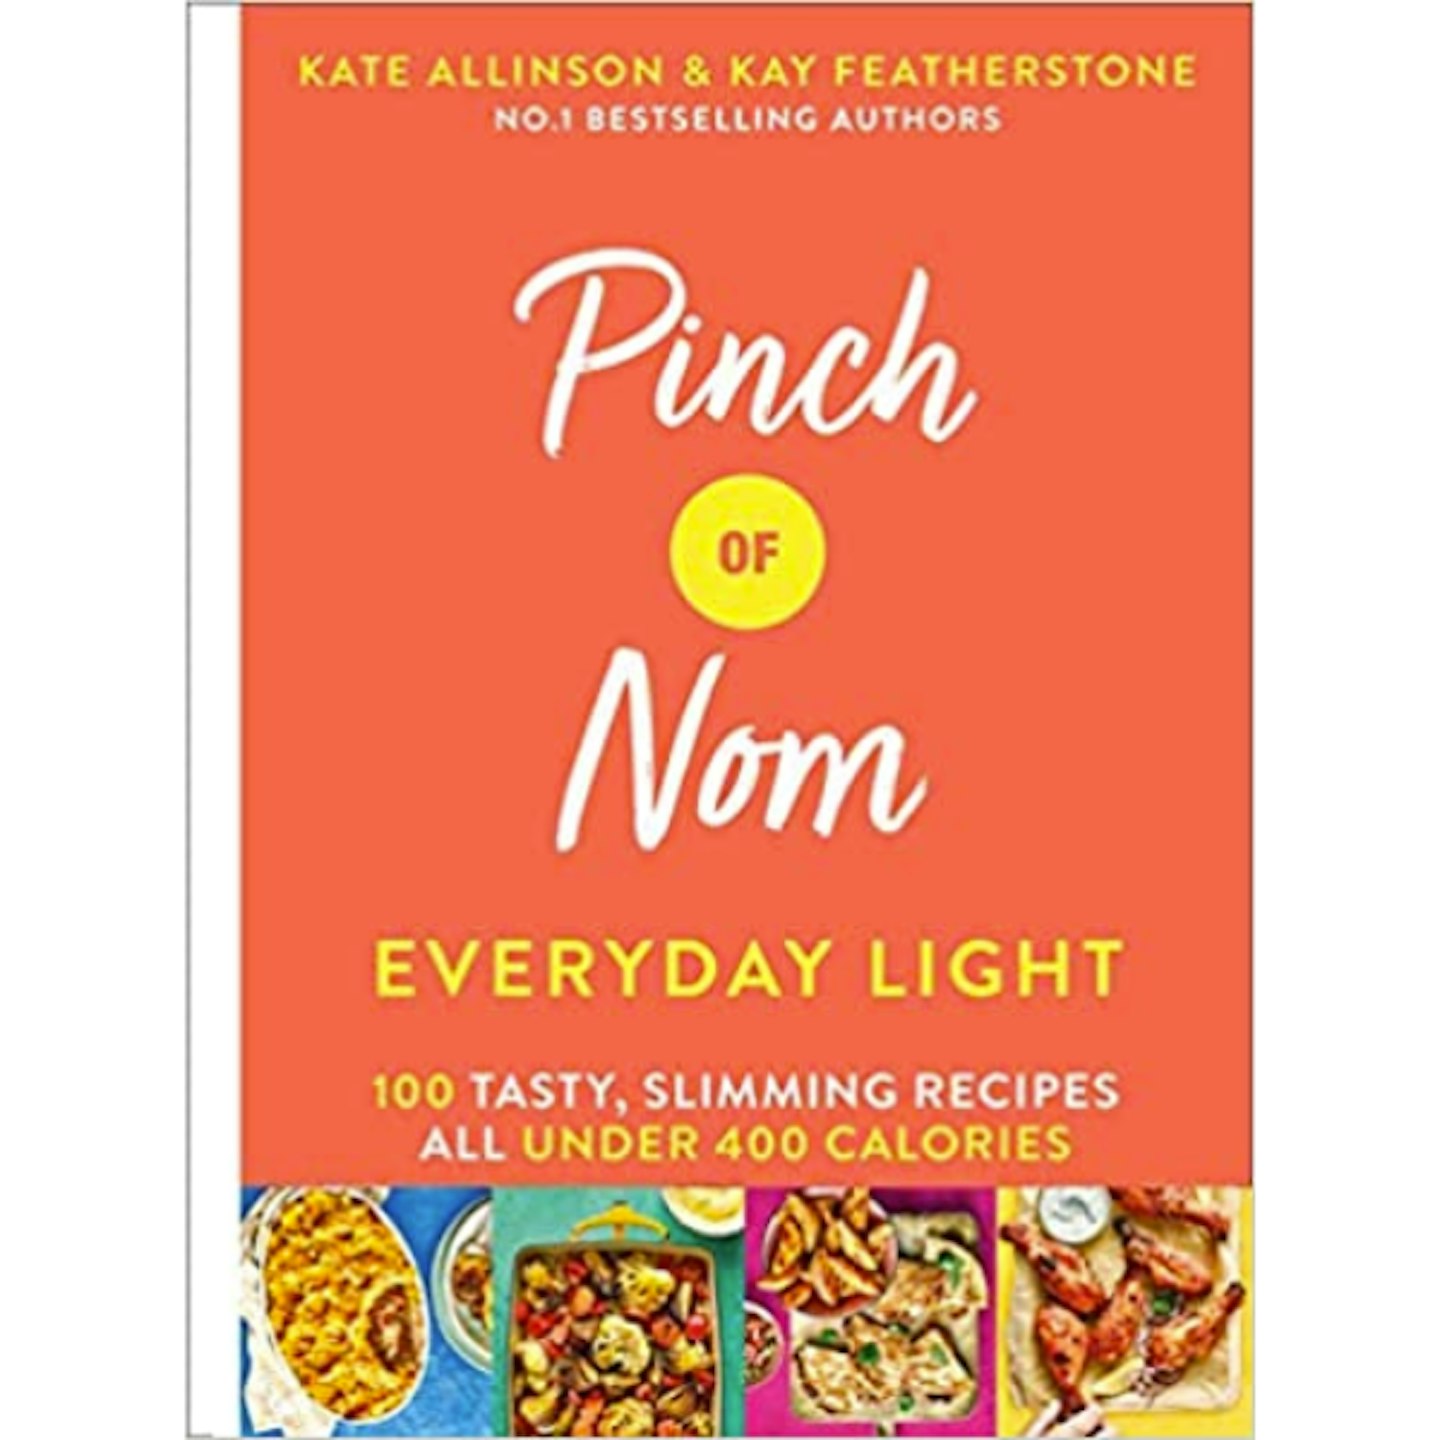 Pinch of Nom Everyday Light: 100 Tasty, Slimming Recipes All Under 400 Calories by Kay Featherstone & Kate Allinson  